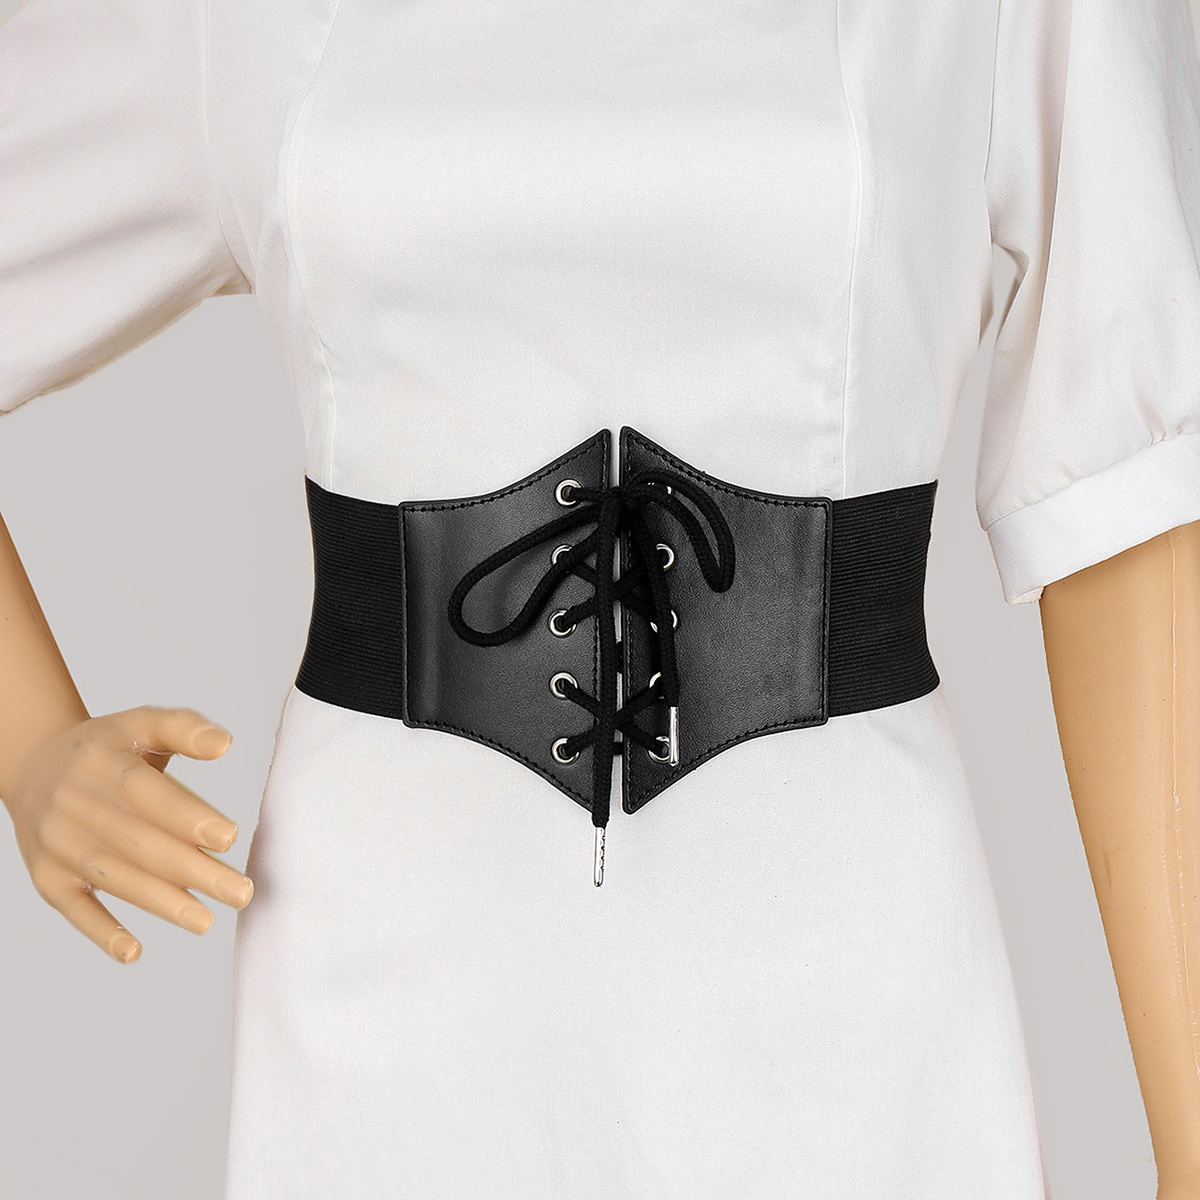 Lace-up Front Corset Belt I discovered amazing products on SHEIN